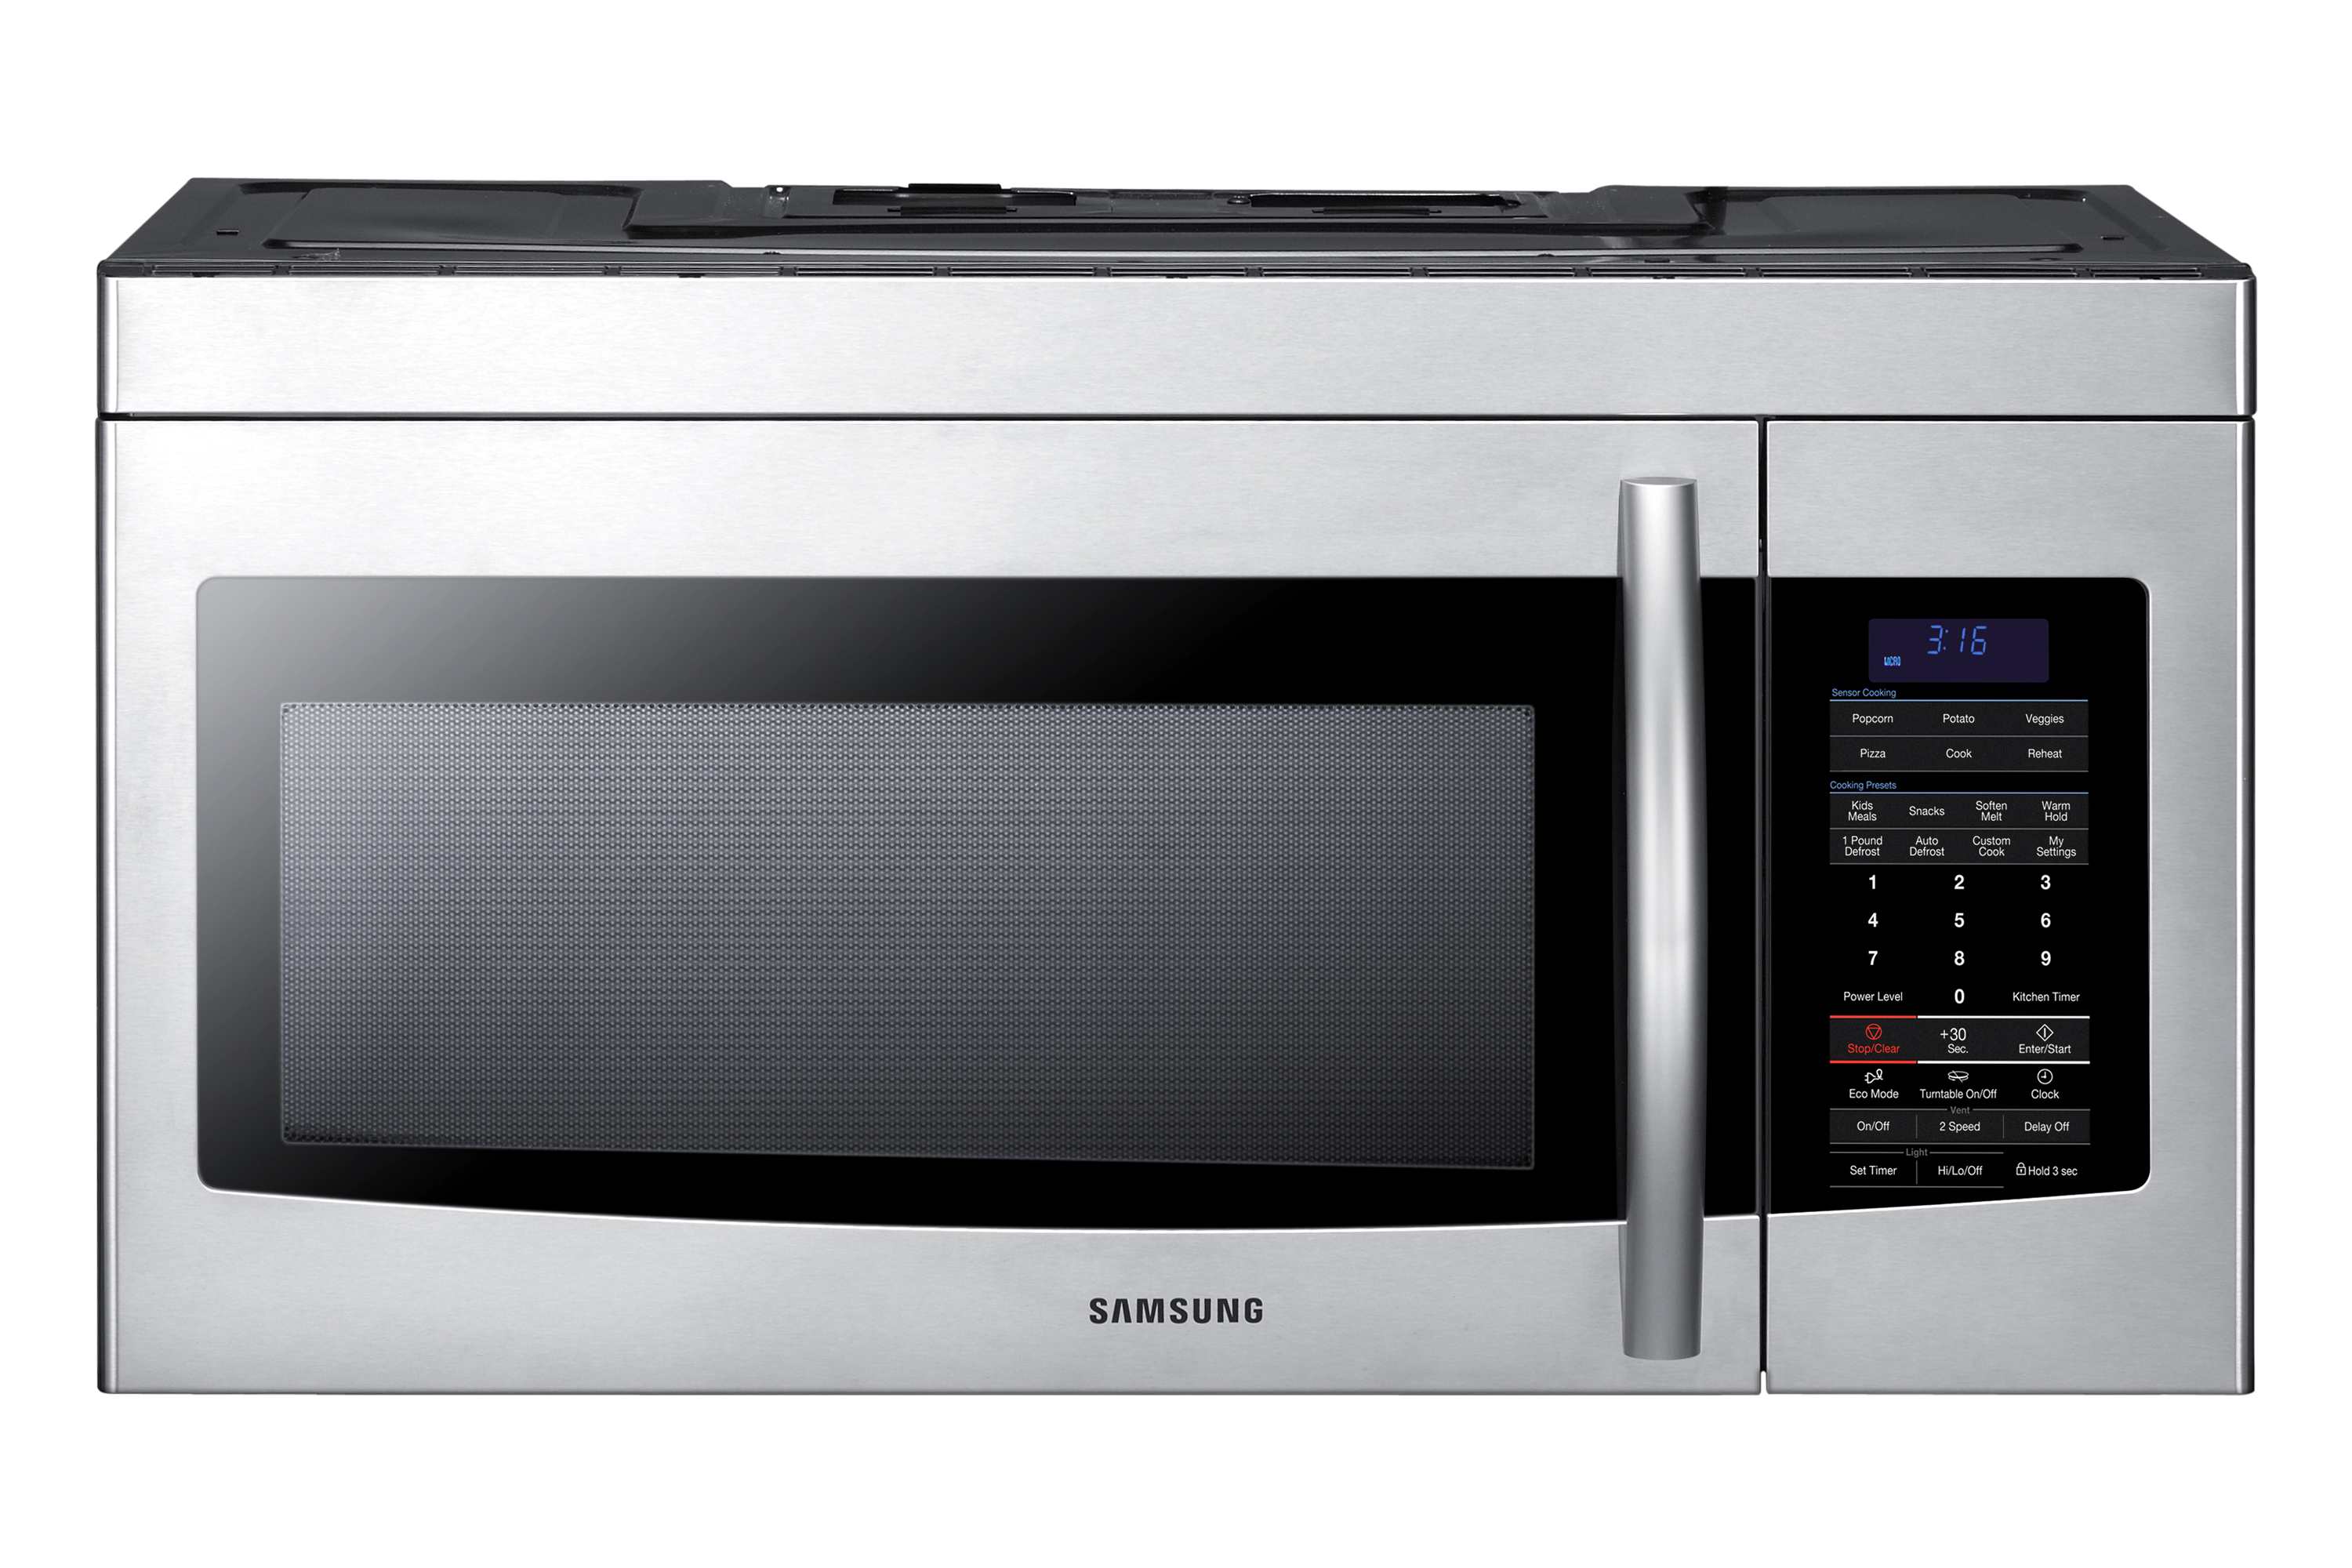 Samsung SMH1713S 1.7 cu. ft. OvertheRange Microwave Oven with 300 CFM Venting System, 2Stage